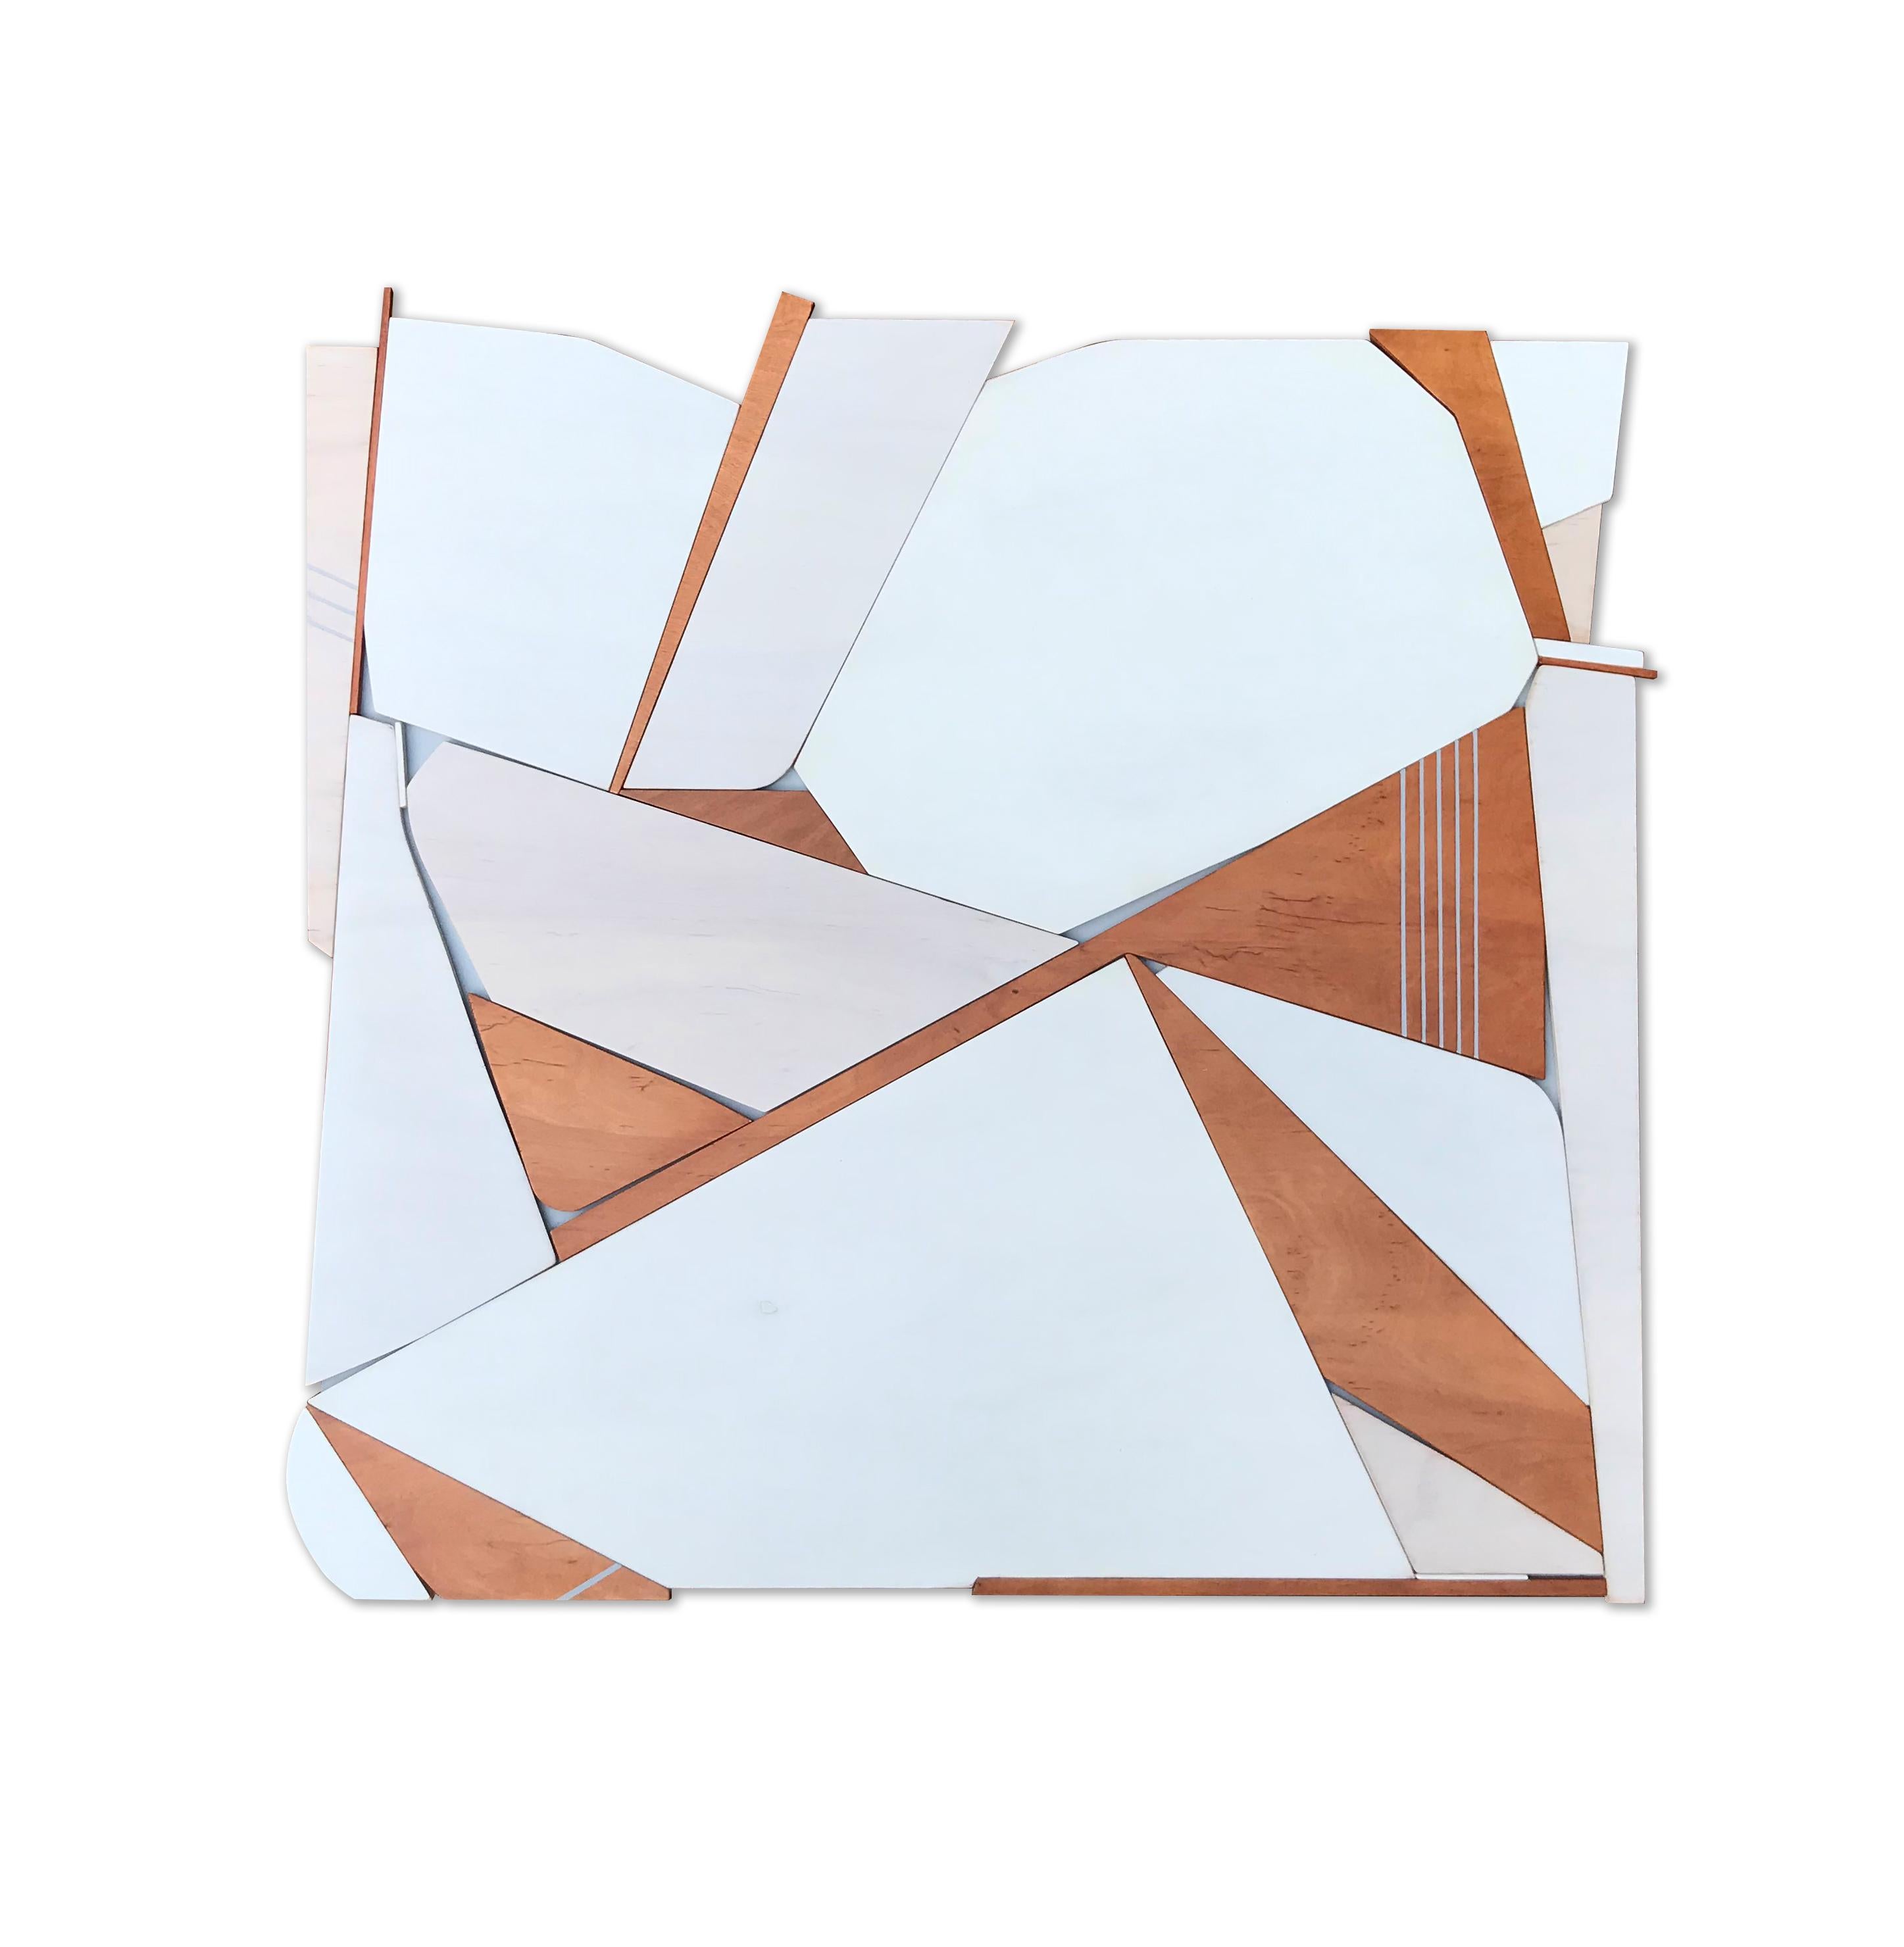 Sparrow (white modern wood wall sculpture, off-white, abstract geometric art) - Sculpture by Scott Troxel